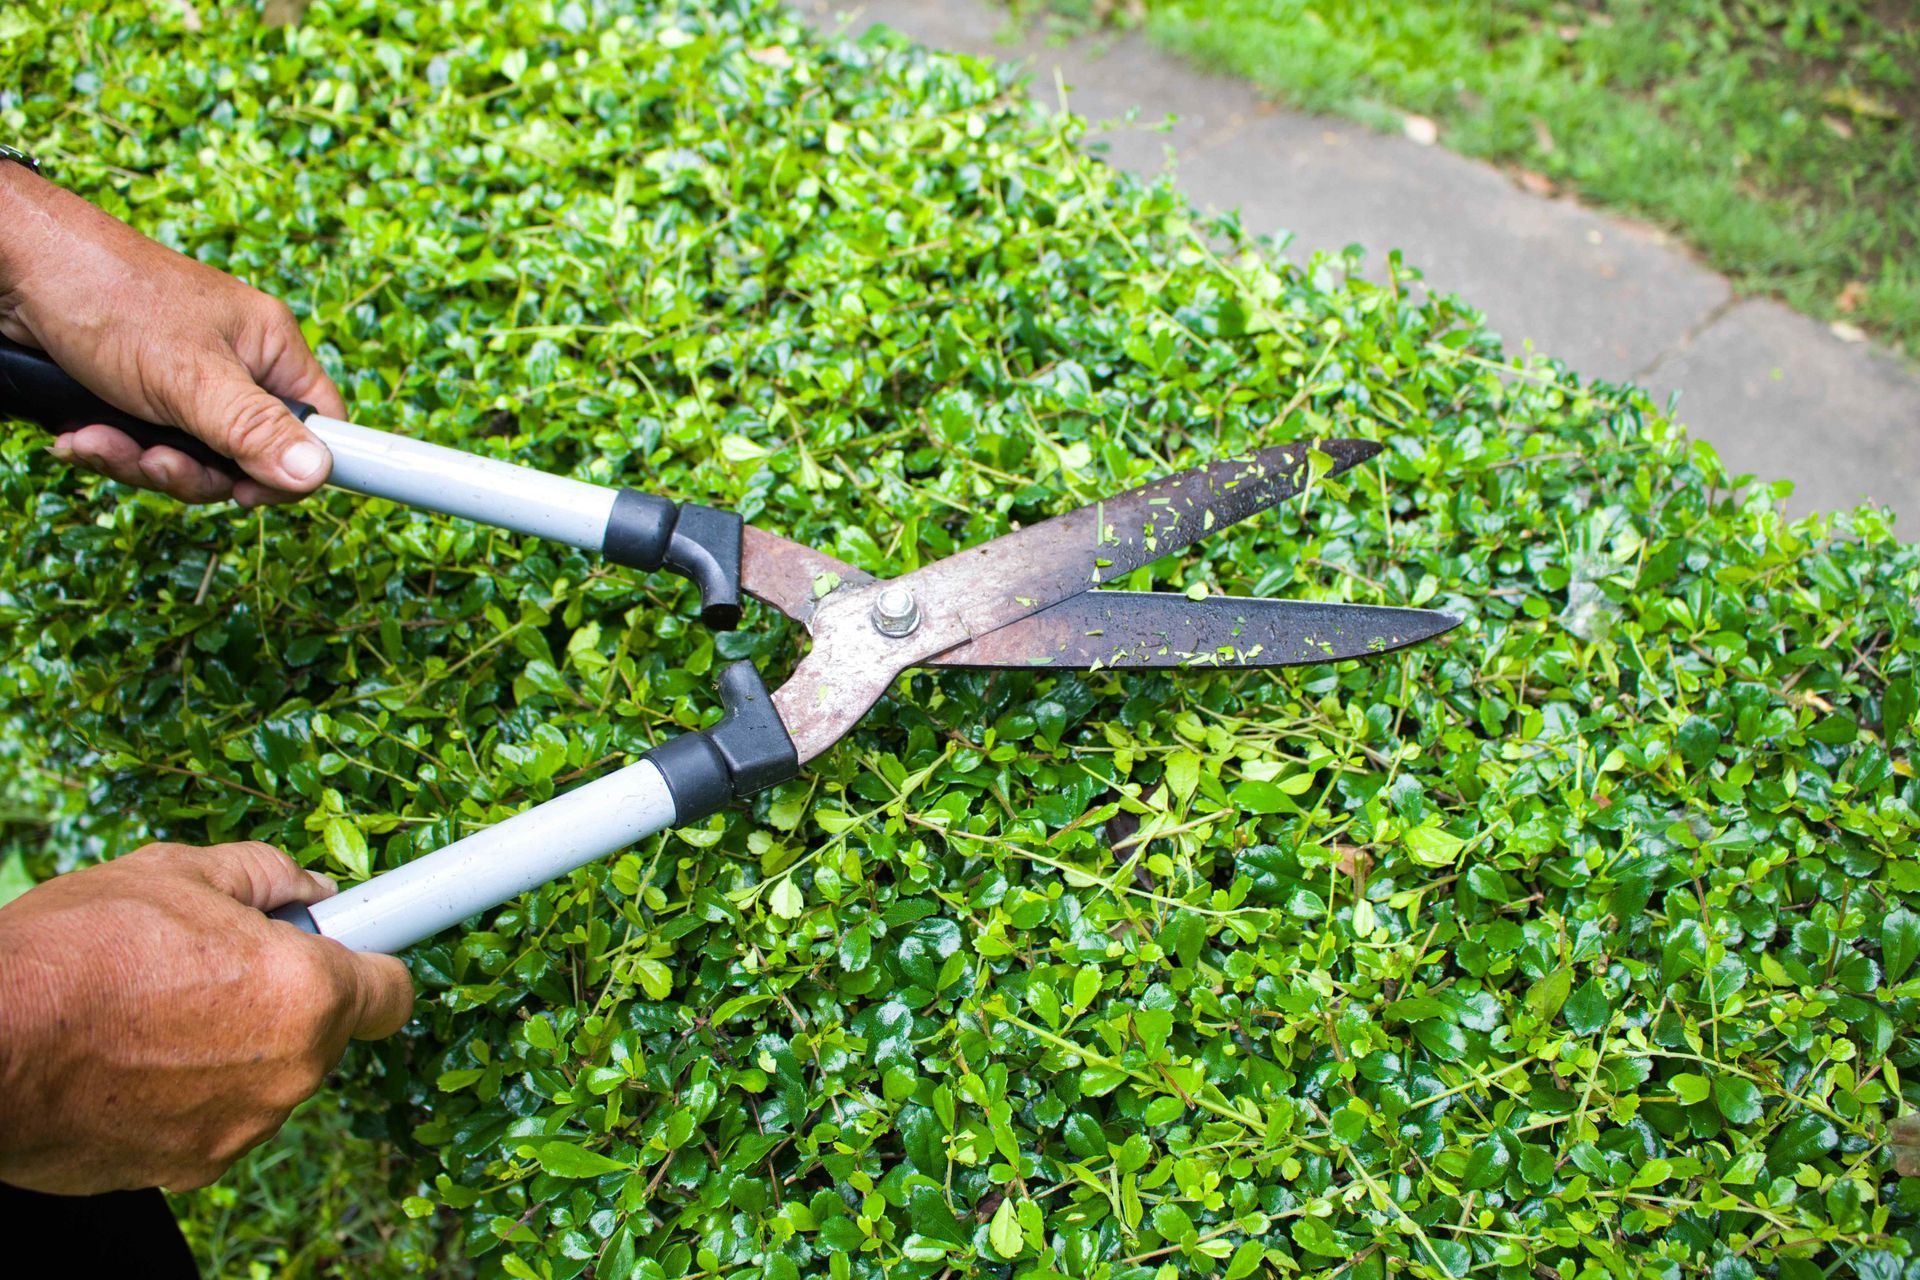 Trimming hedges with sheers